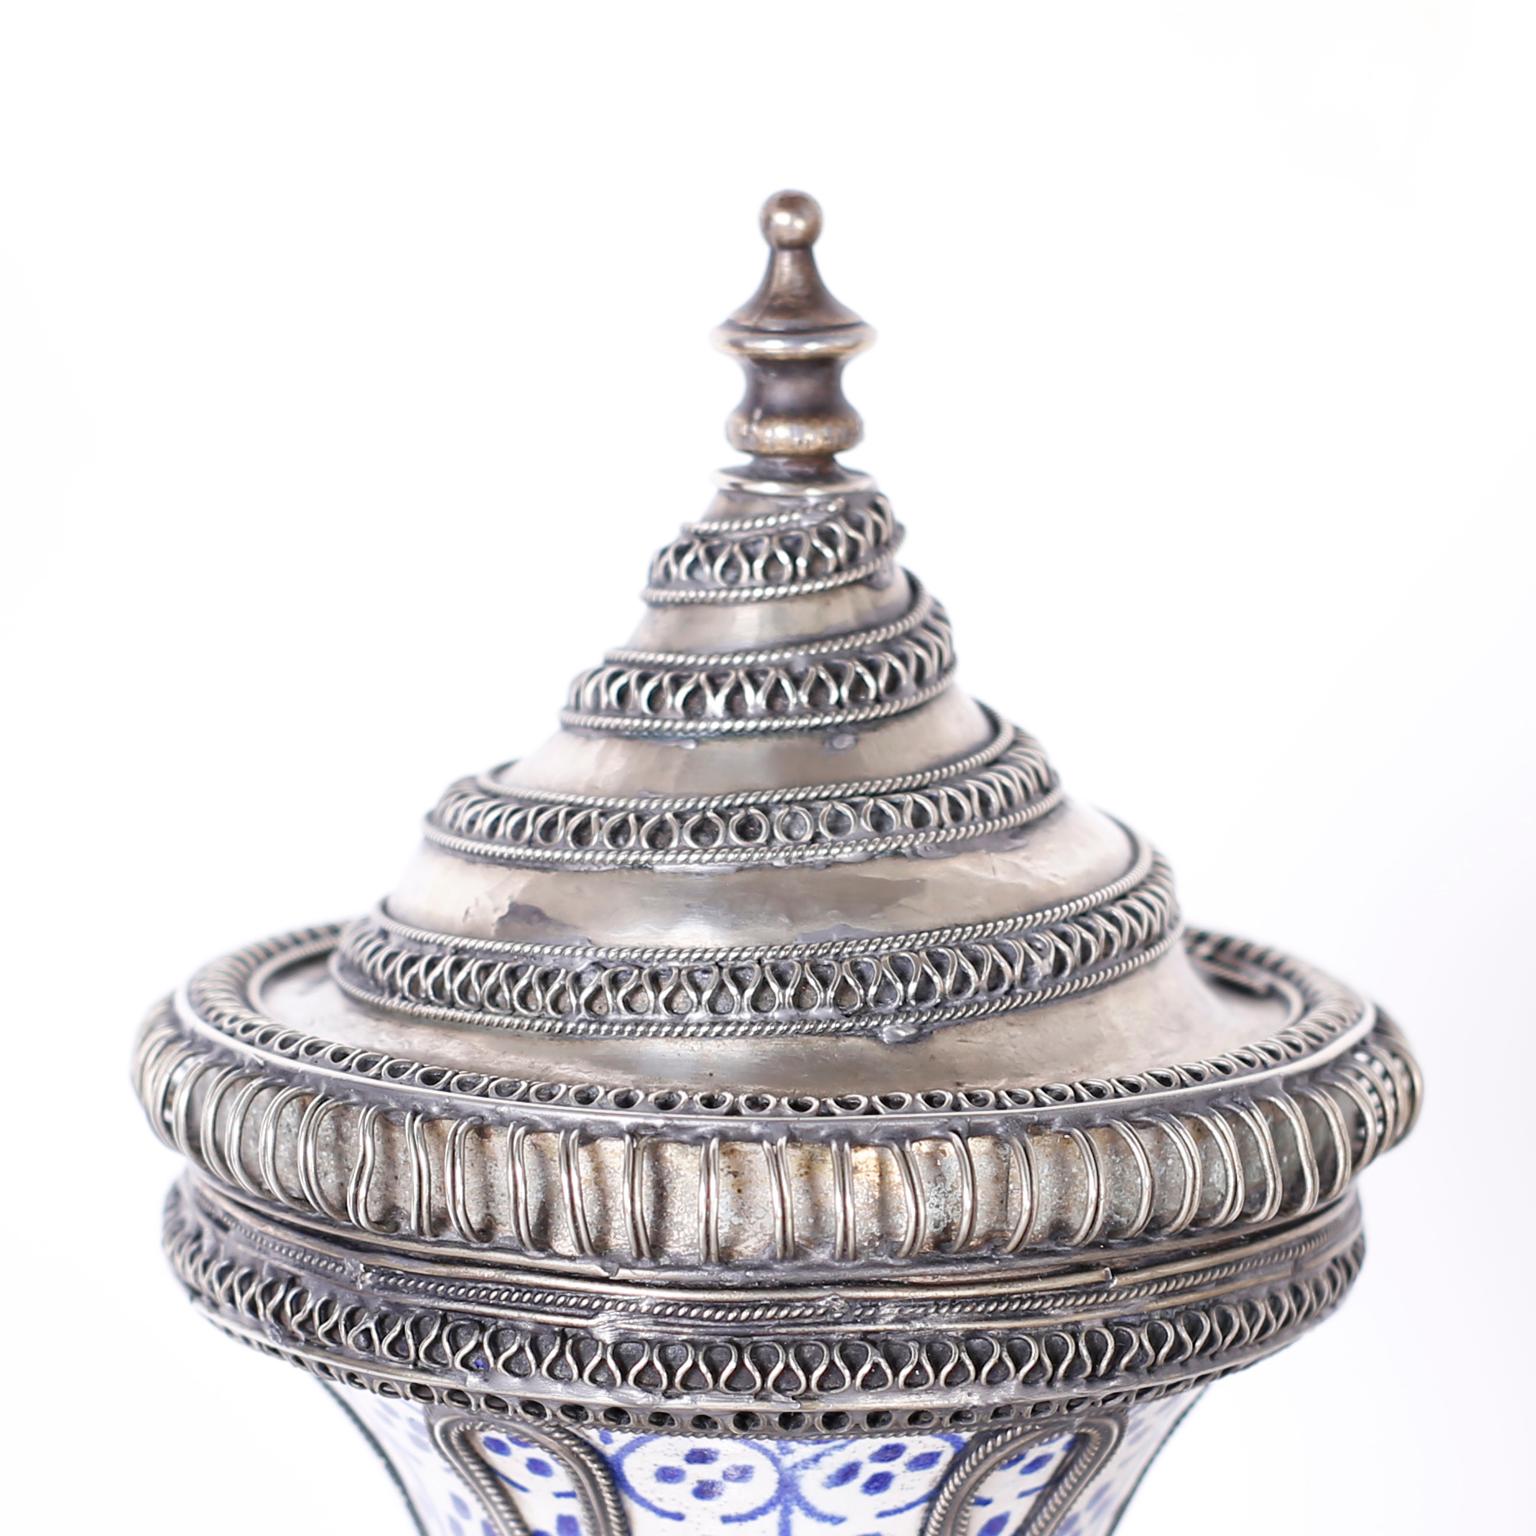 Lofty Moroccan porcelain lidded jar decorated with distinctive mediterranean designs and colors and adorned with jewelry like metal work.